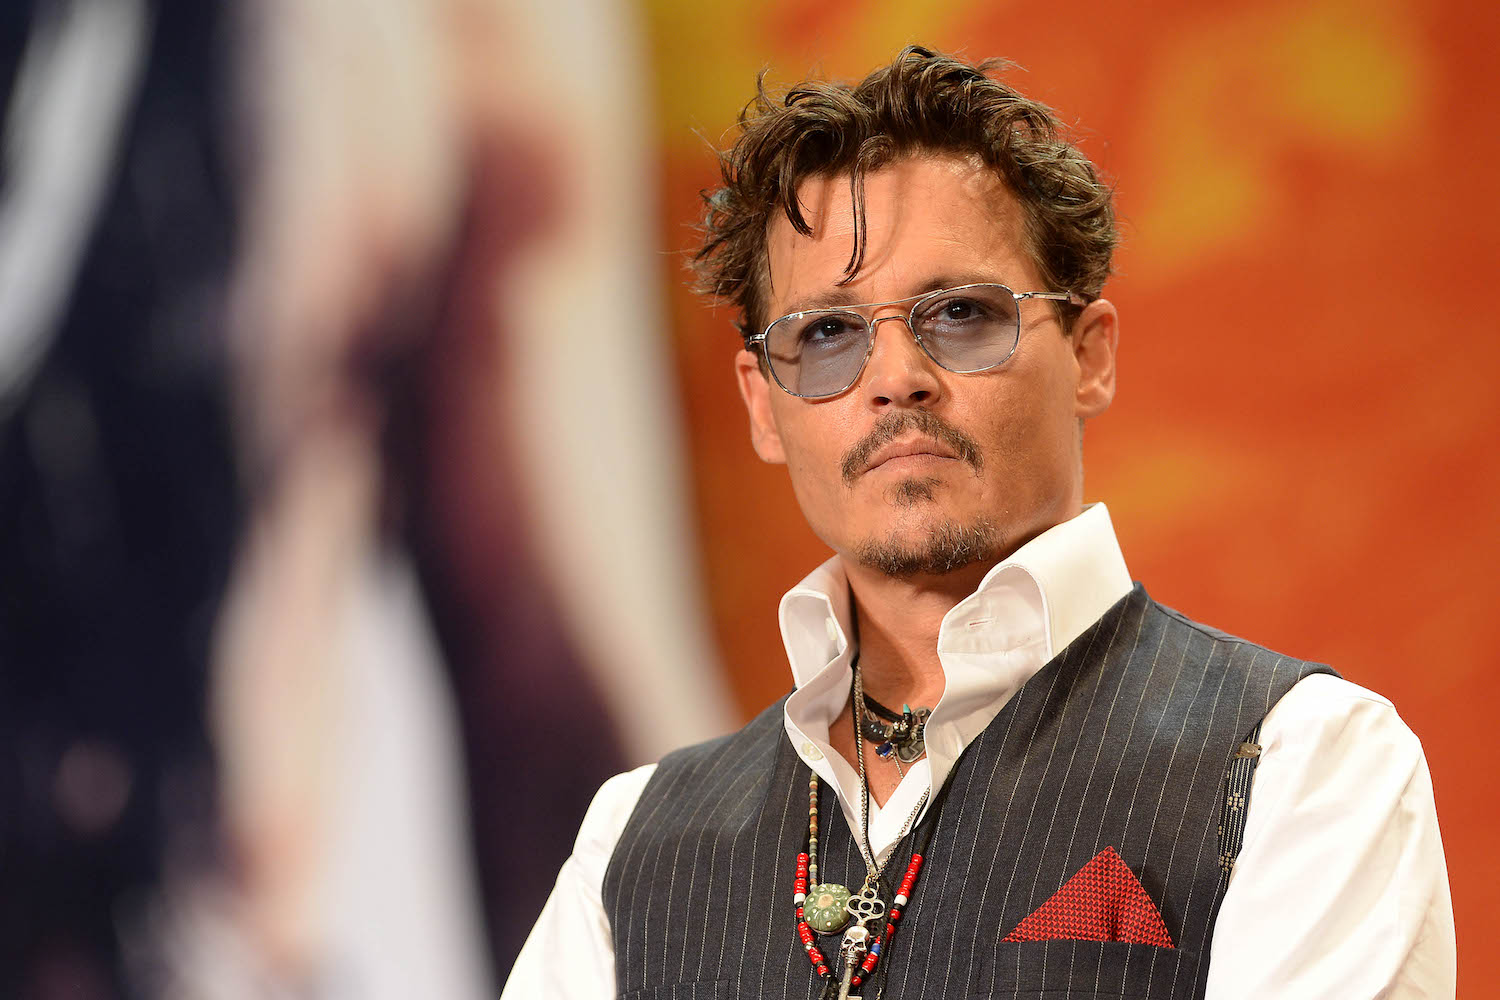 Johnny Depp on the red carpet for a movie premier.